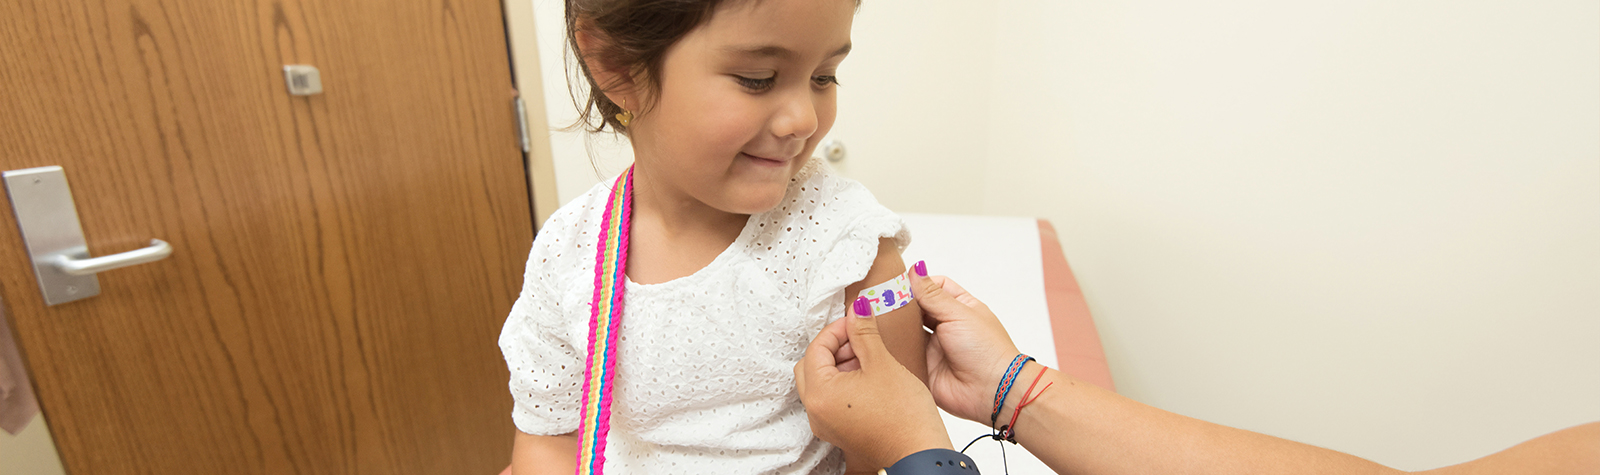 Vaccination update – covid winter dose and influenza vaccination for children